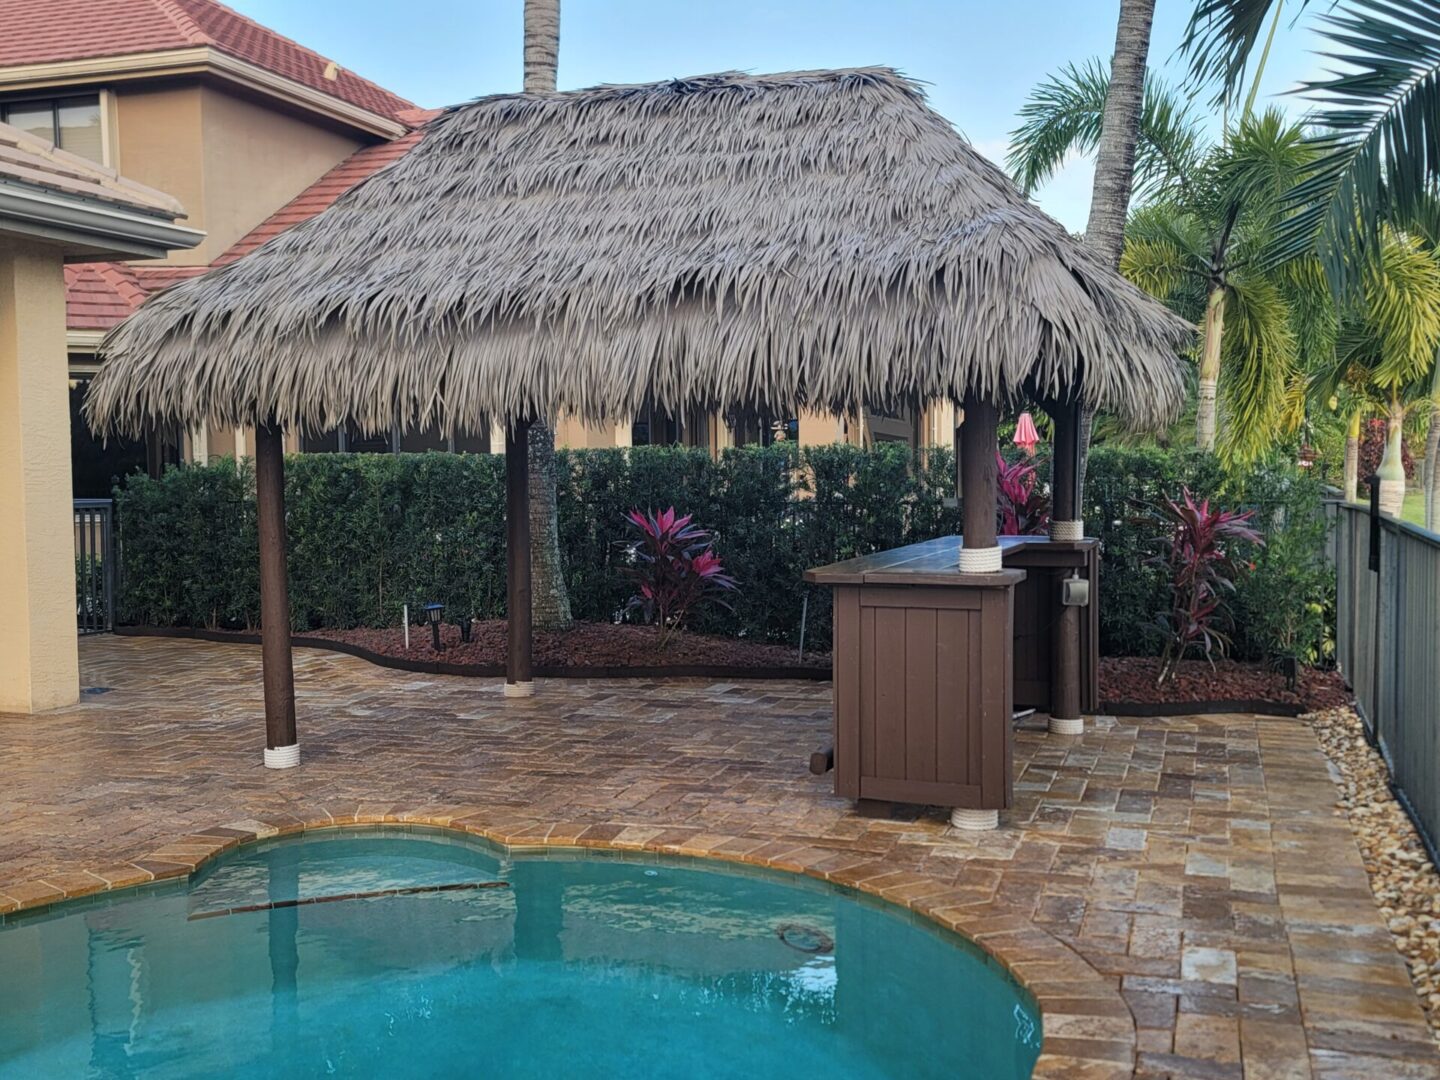 A thatched gazebo with a pool and palm trees.